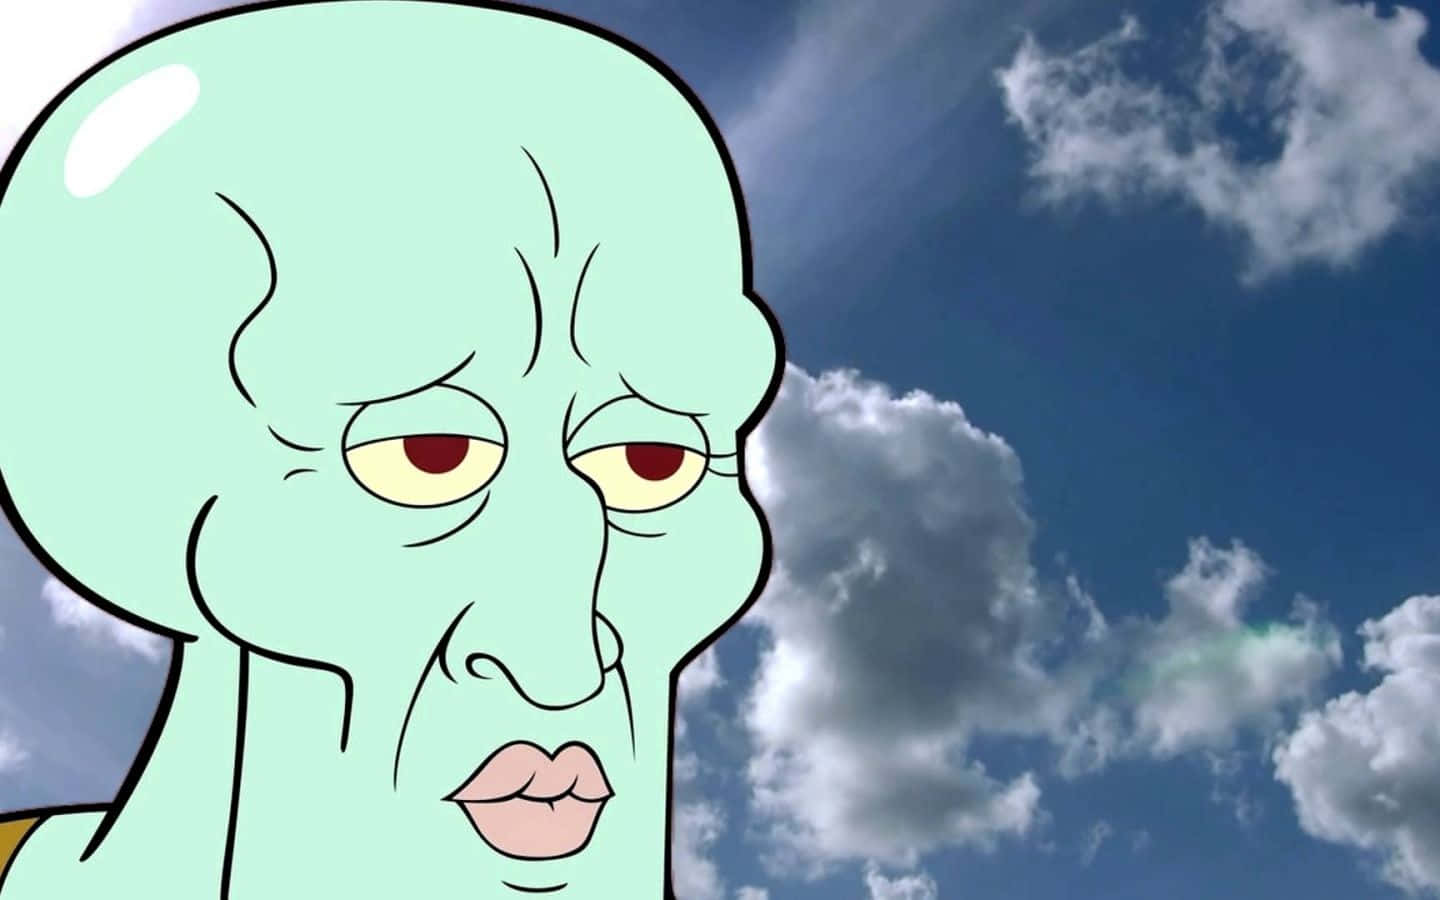 Tim Pangburn  Tattooed handsome Squidward Because the world is still a  right and just place  Facebook